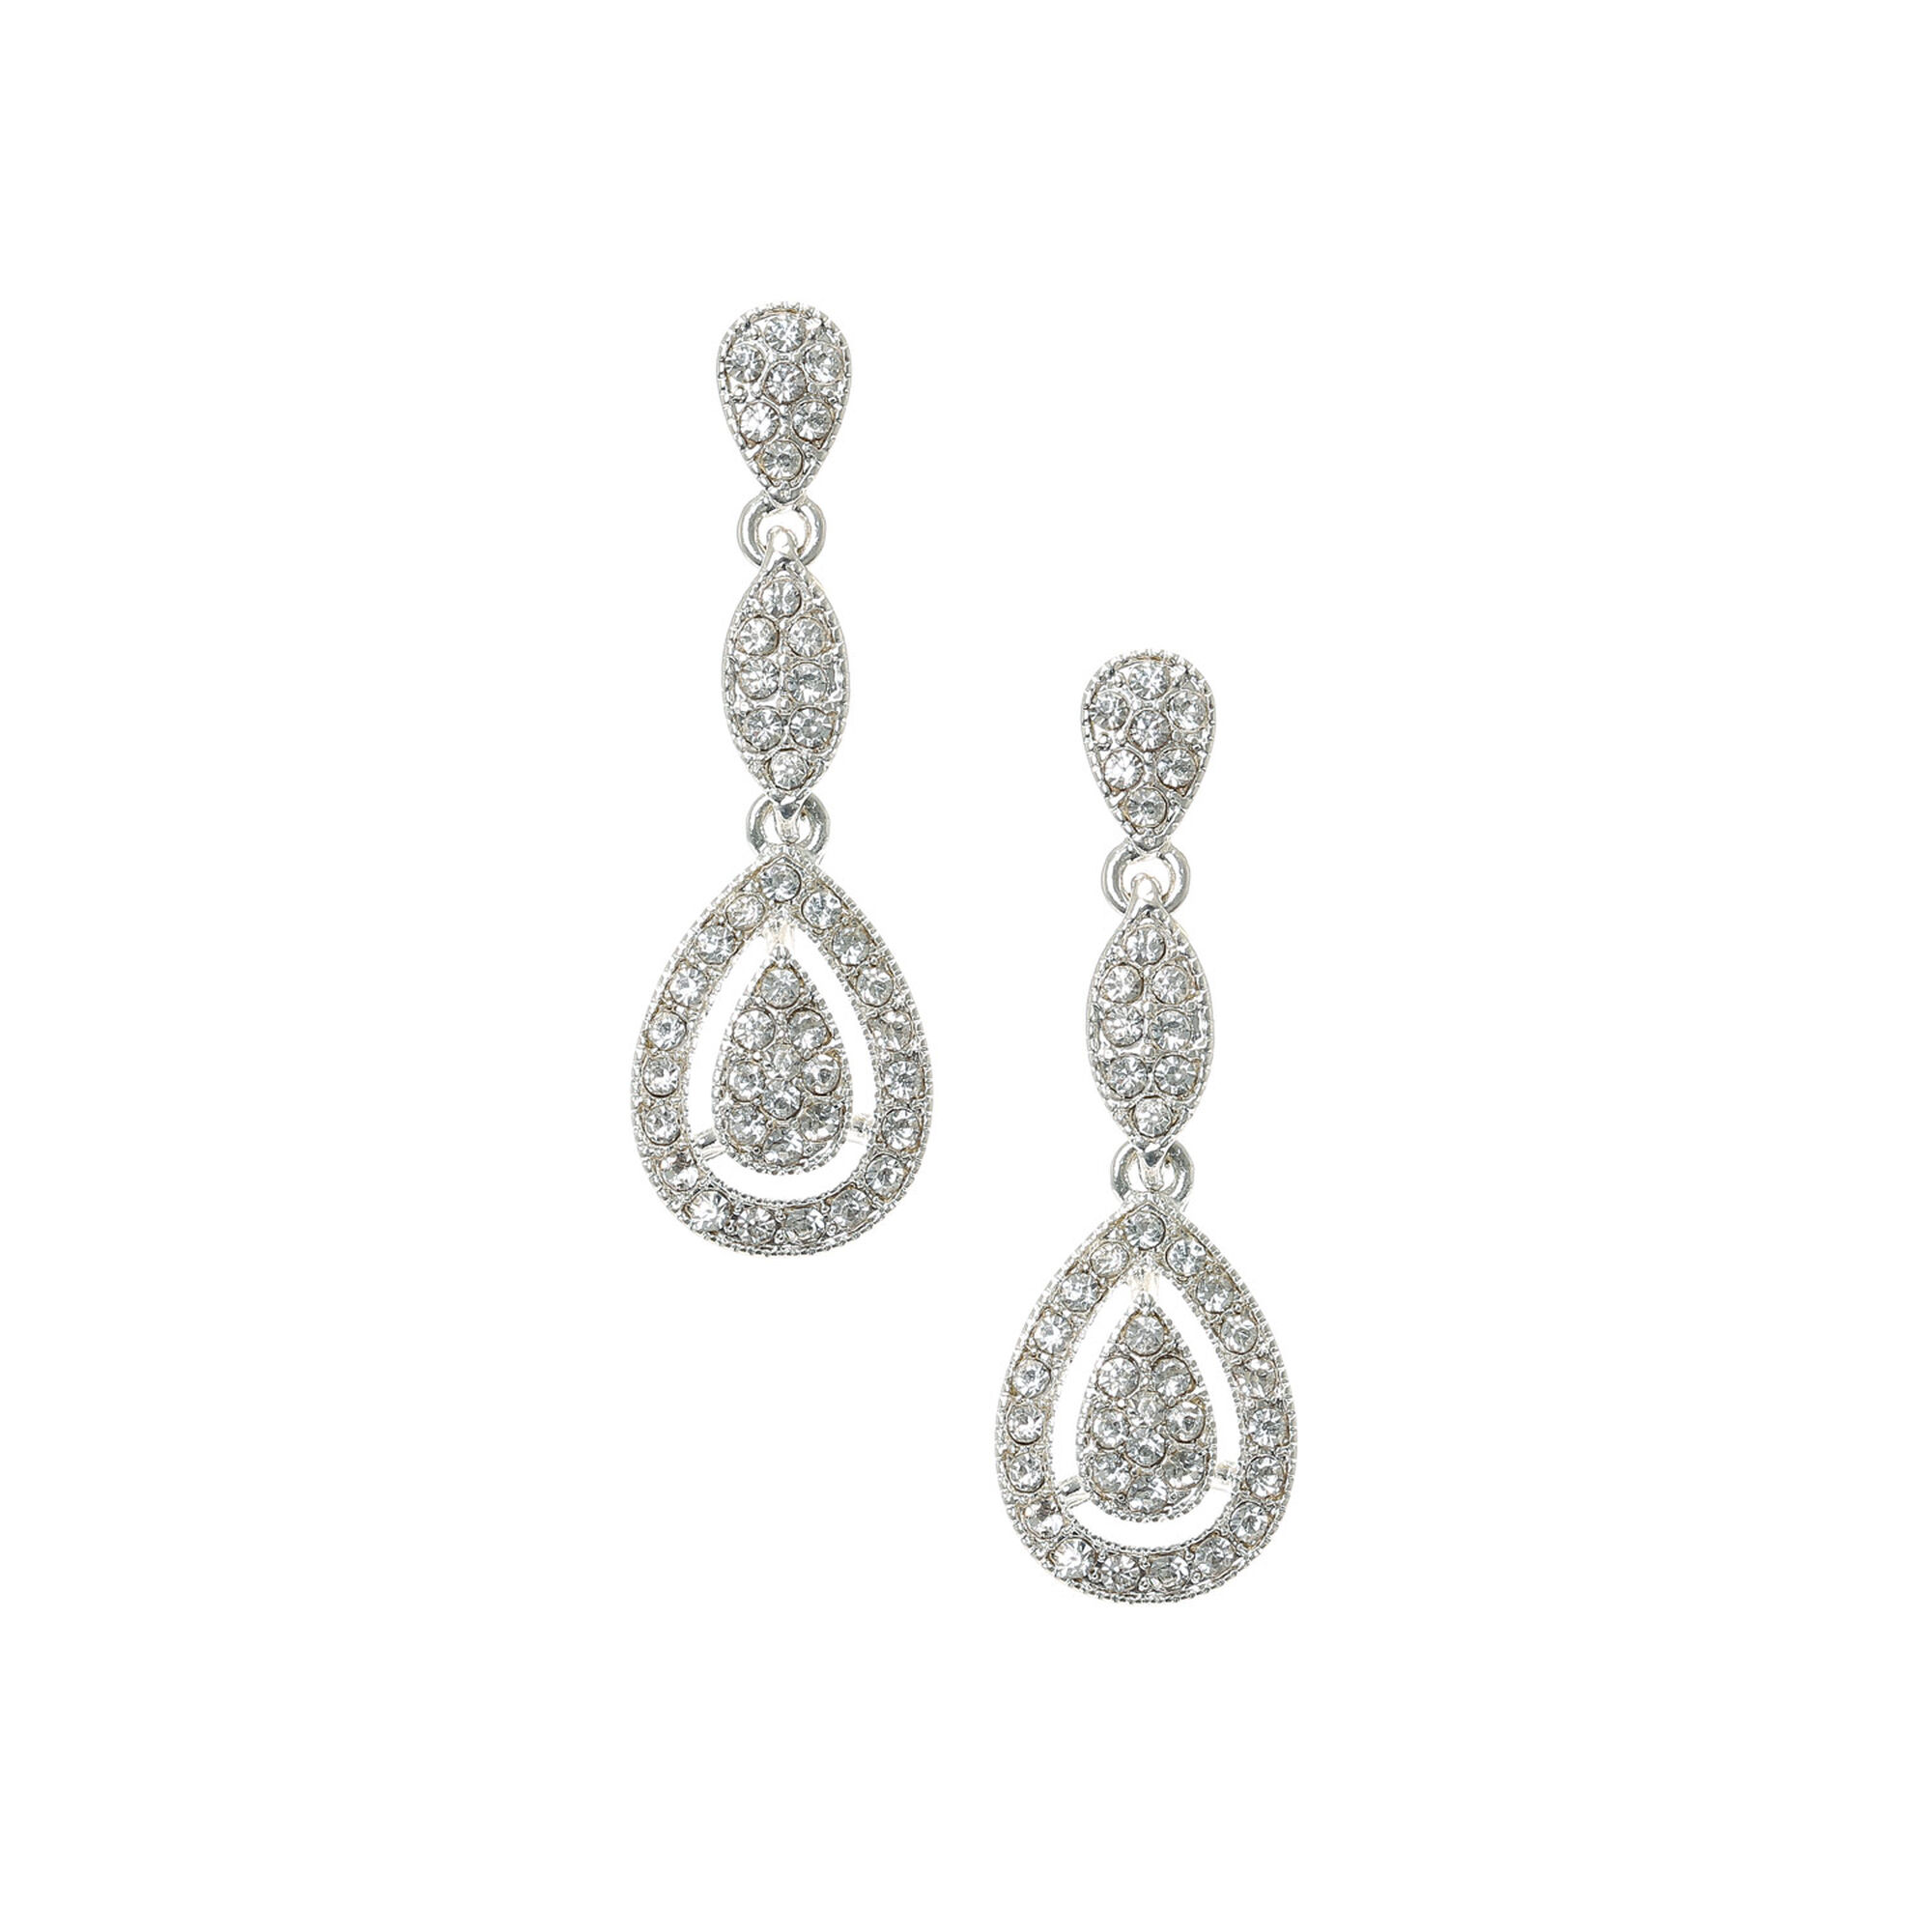 View Claires Tone 15 Embellished Teardrop Drop Earrings Silver information